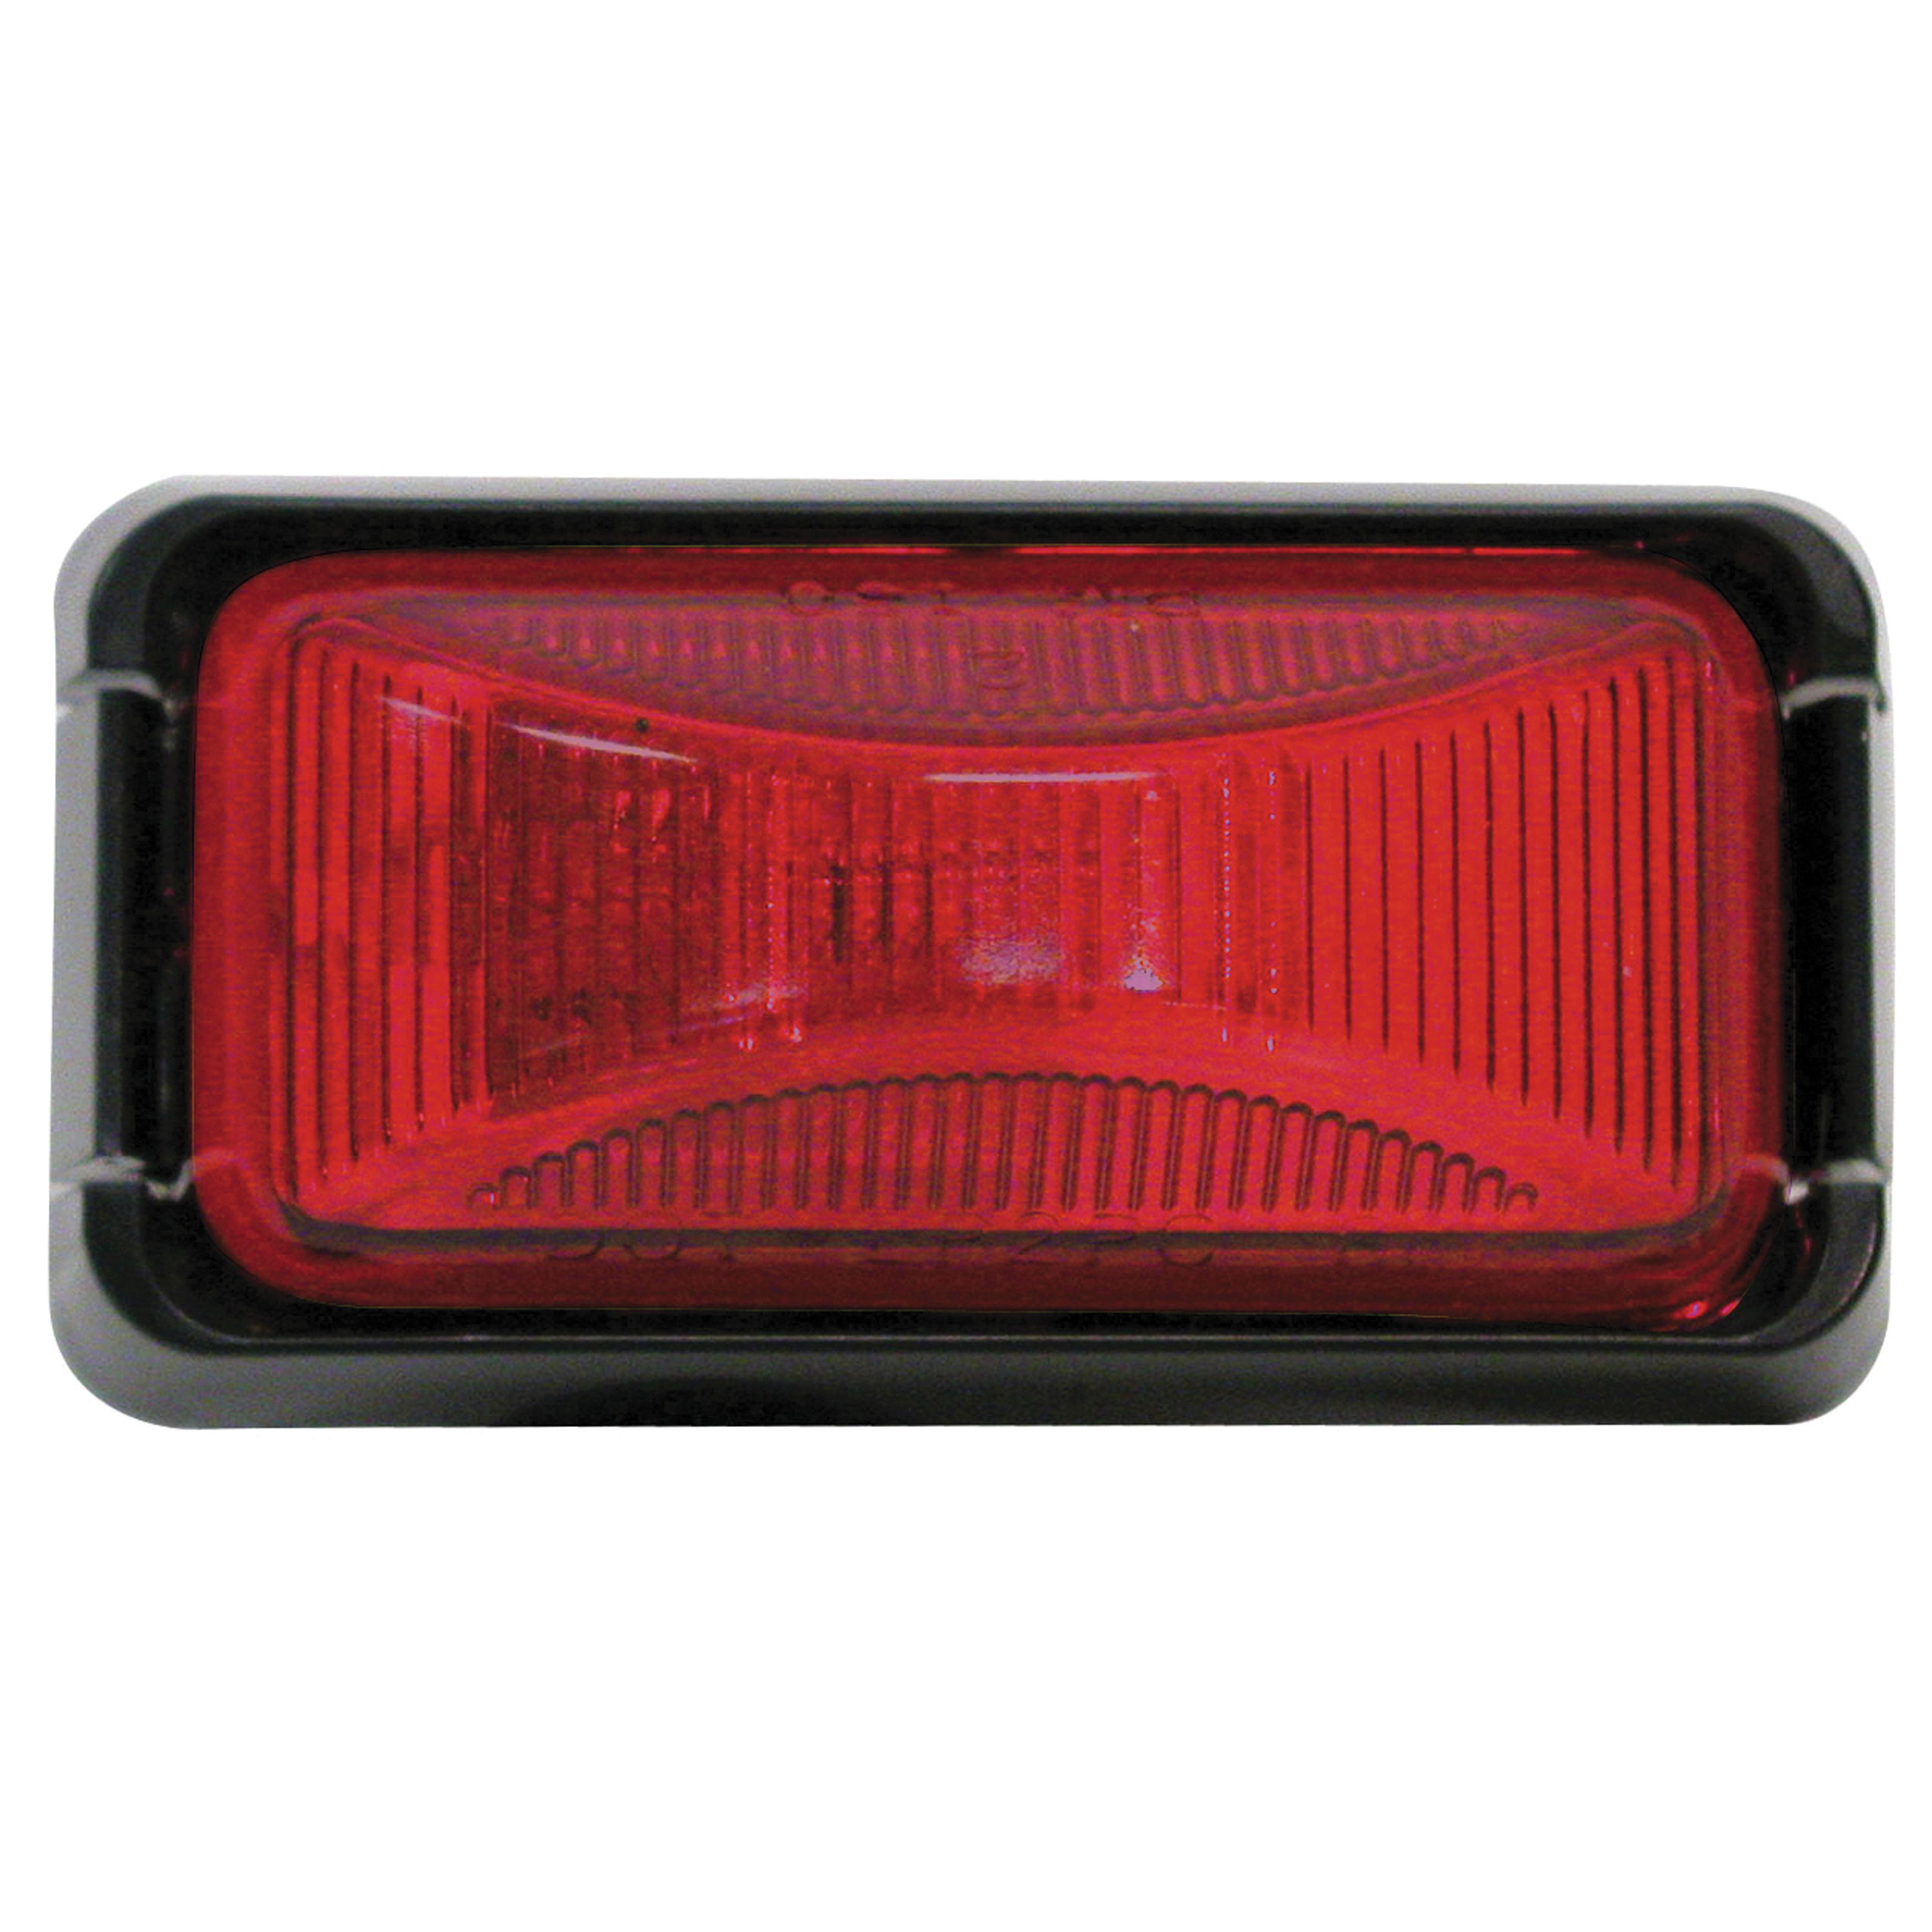 Peterson Manufacturing E452L Submersible Combination Trailer Tail Light